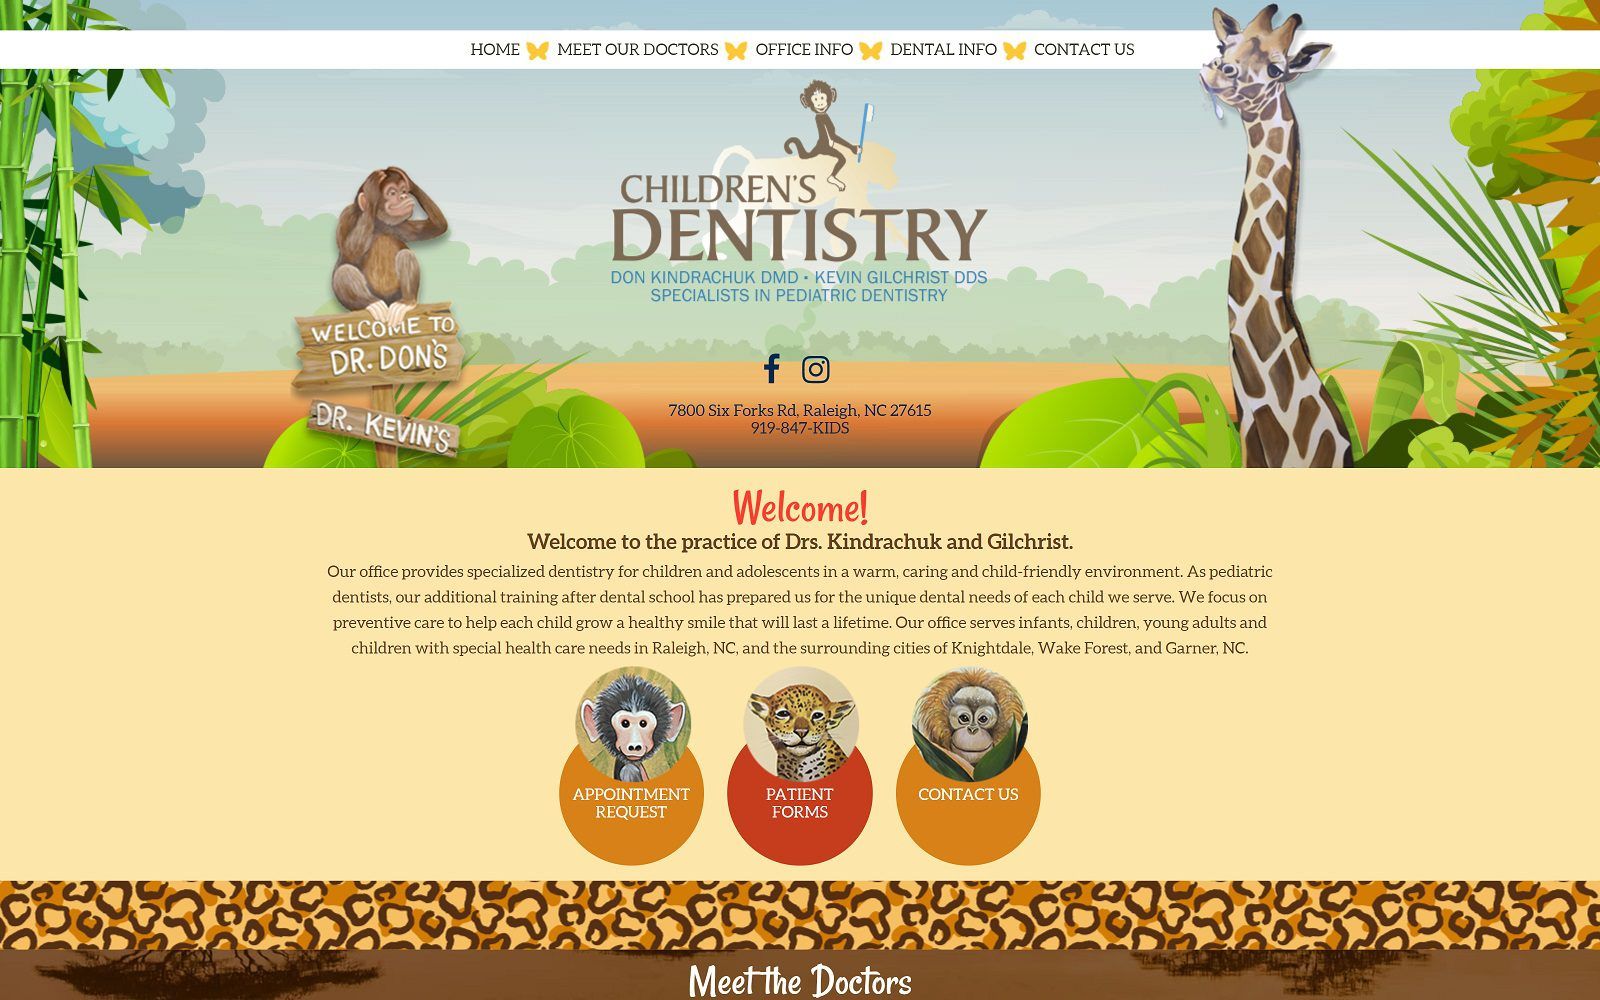 The screenshot of drs. Kindrachuk and gilchrist, children’s dentistry website